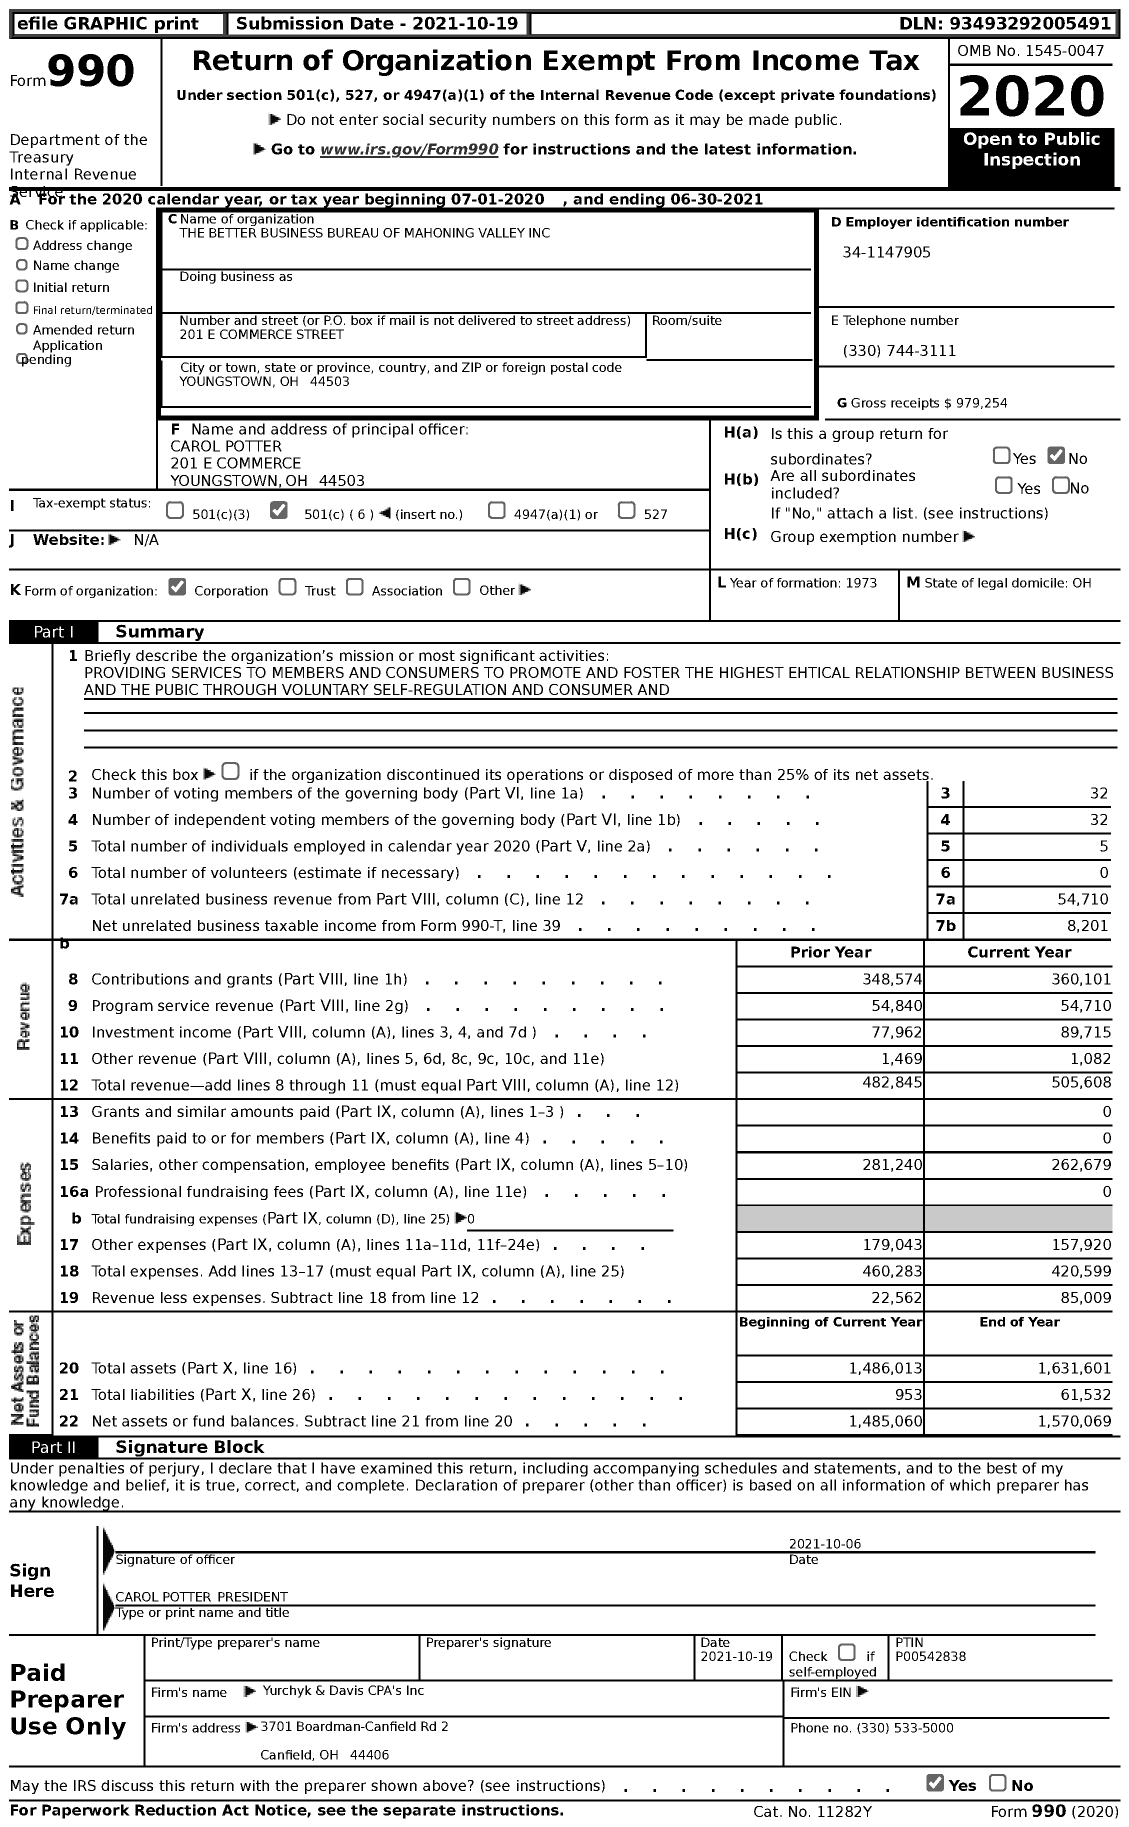 Image of first page of 2020 Form 990 for The Better Business Bureau of Mahoning Valley